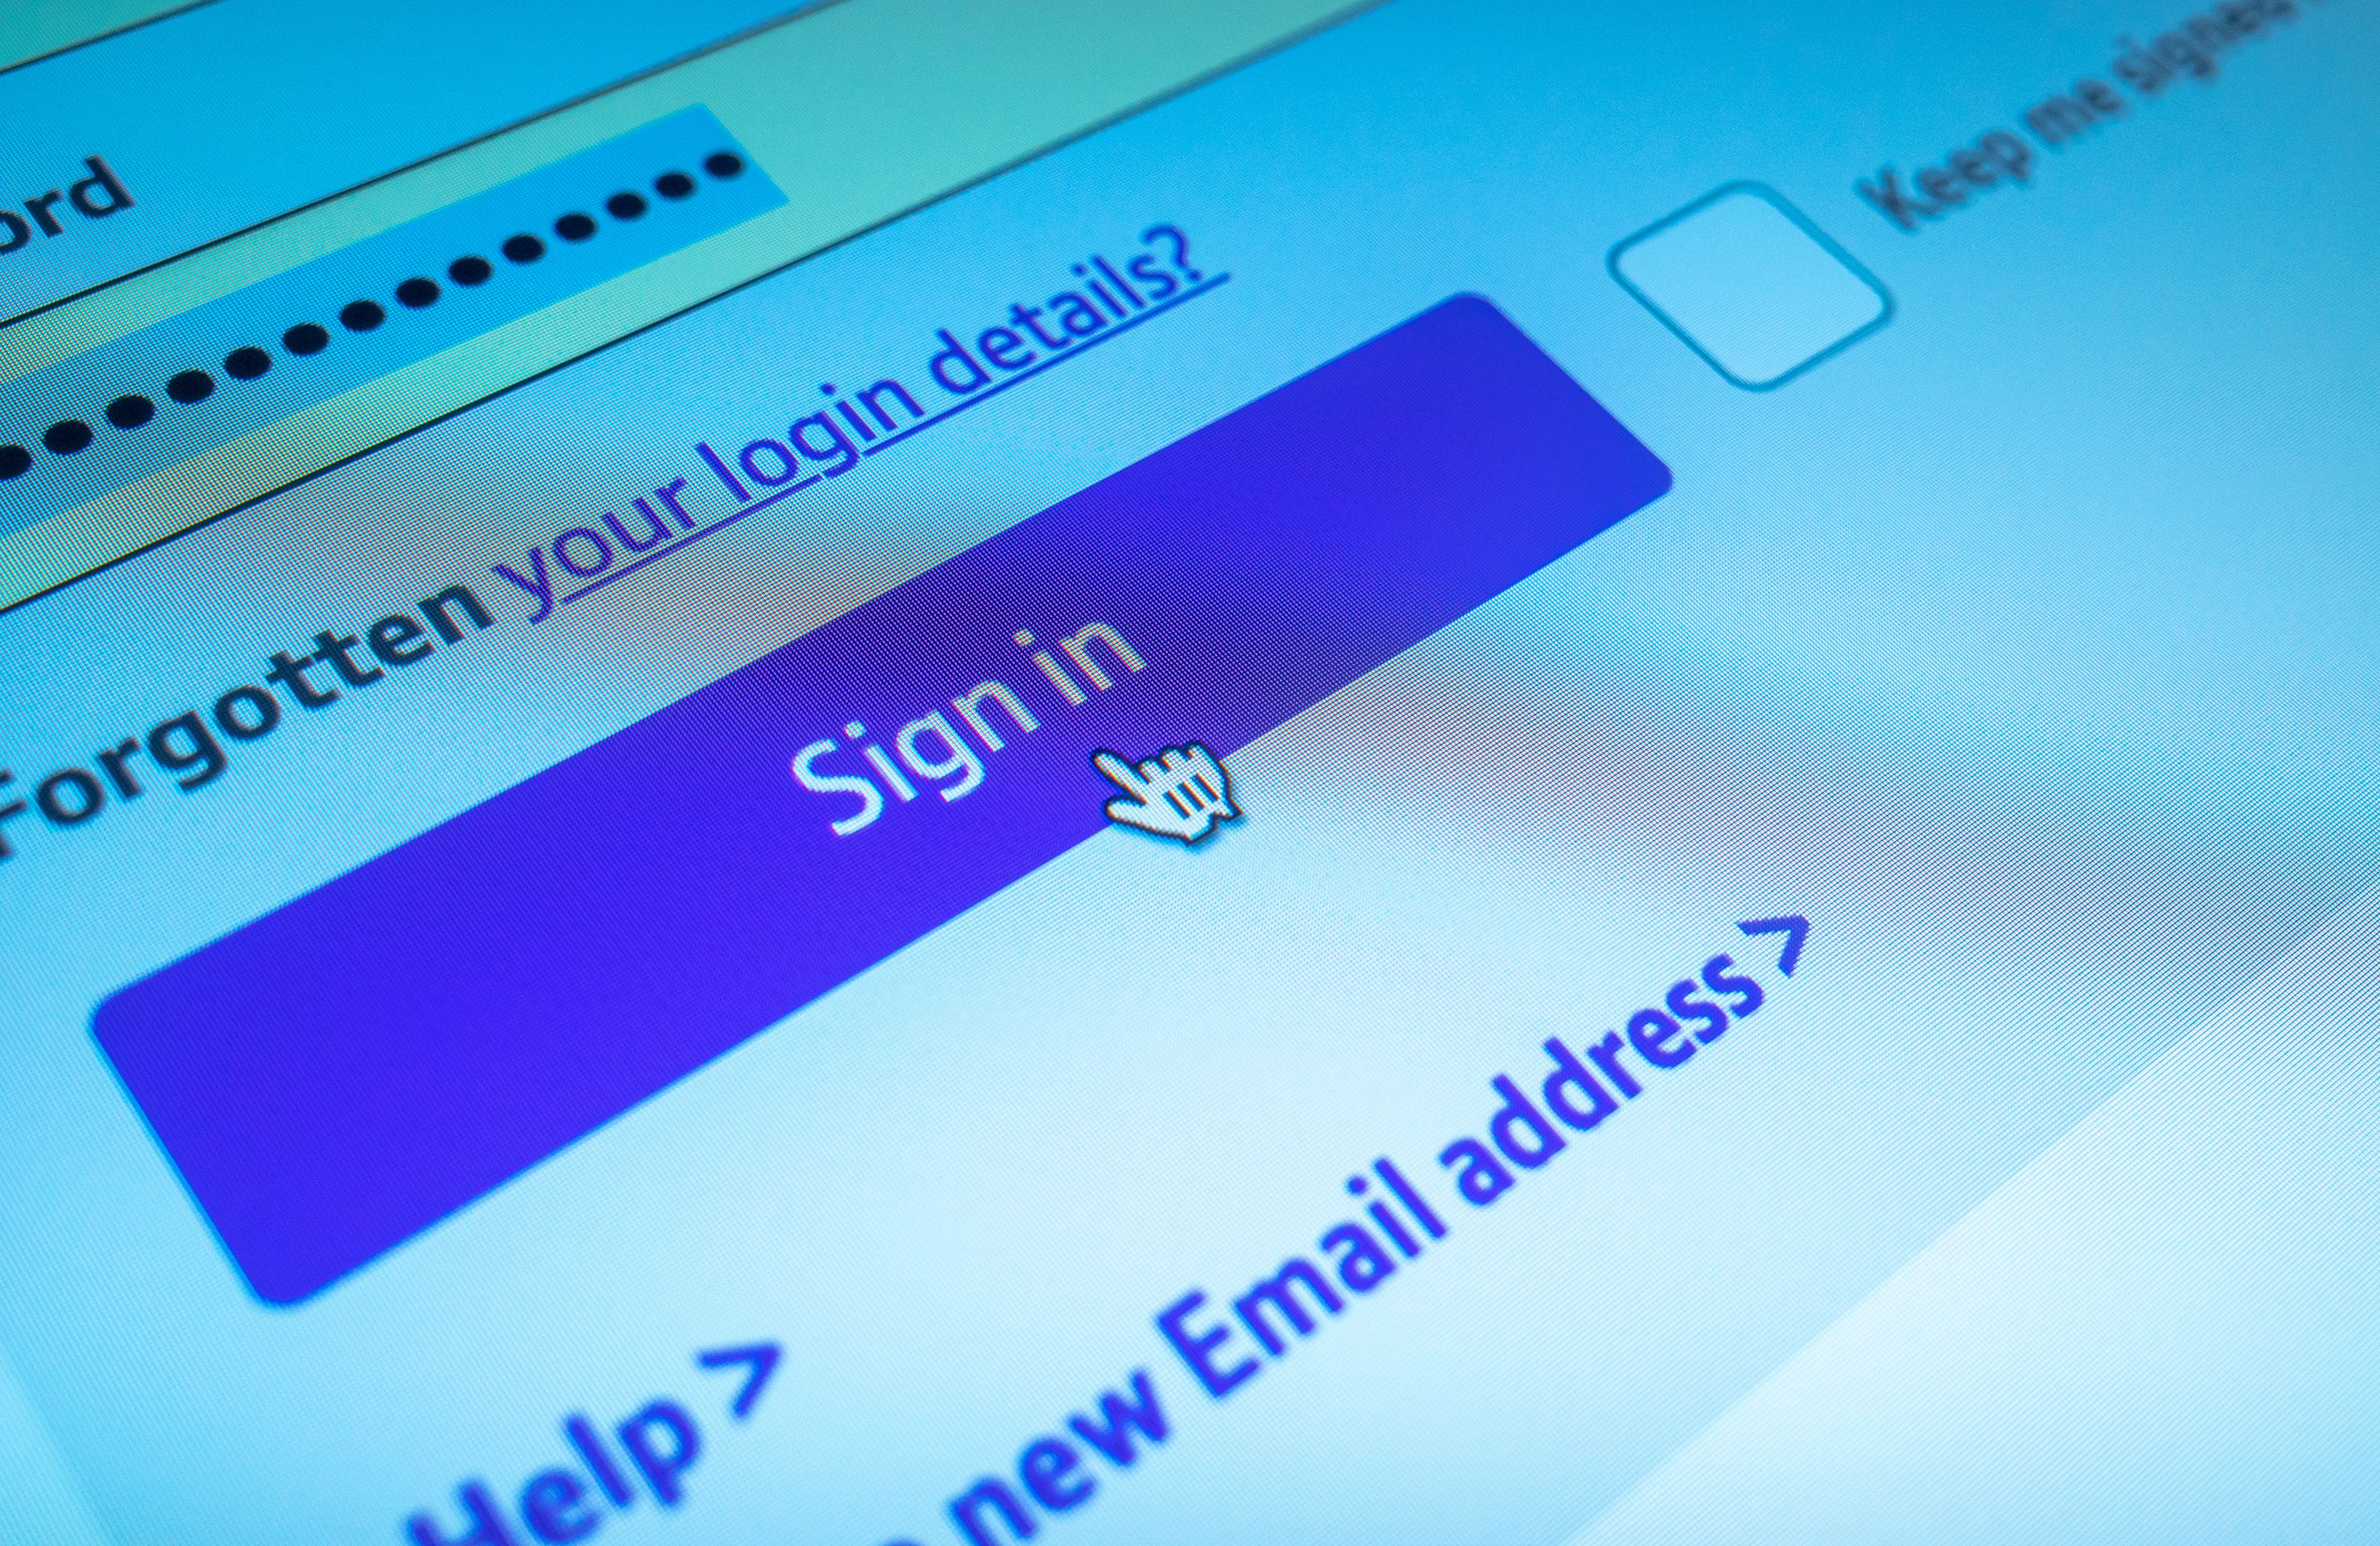 USPS Impersonated in Credit Card Phishing Scam